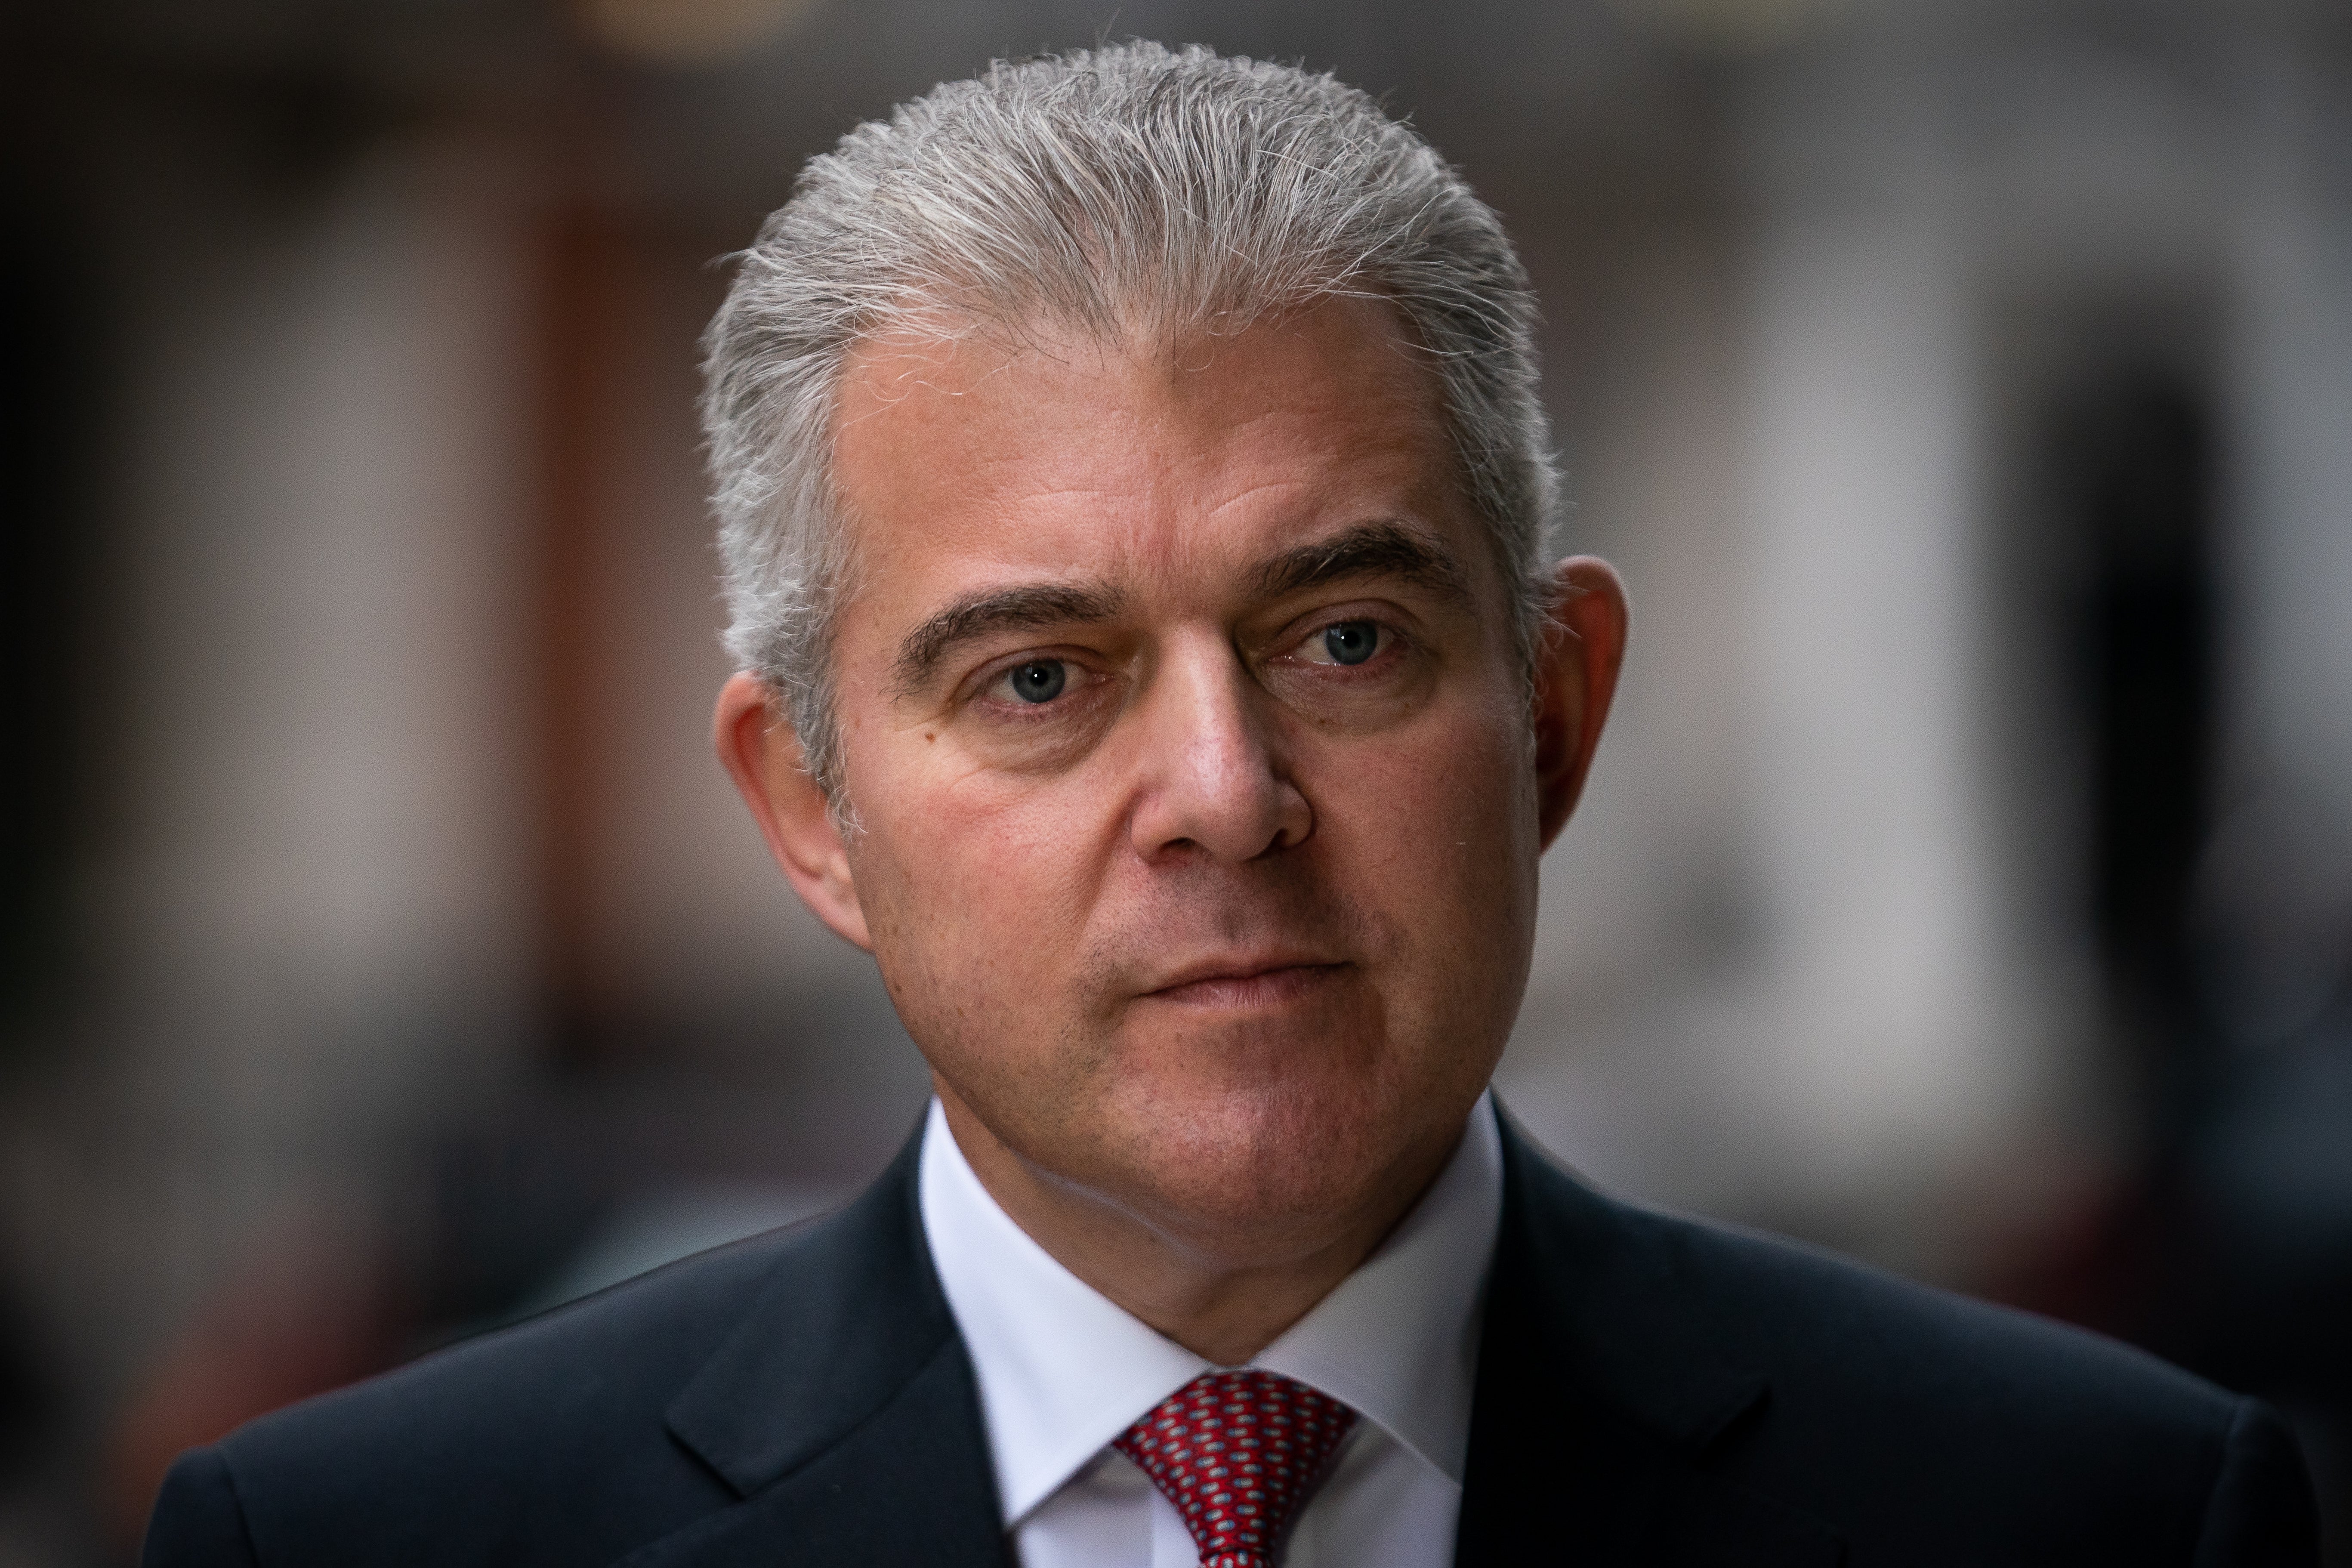 Sir Brandon Lewis is trousering £150,000 from five extra jobs - on top of his £86,000 MP salary